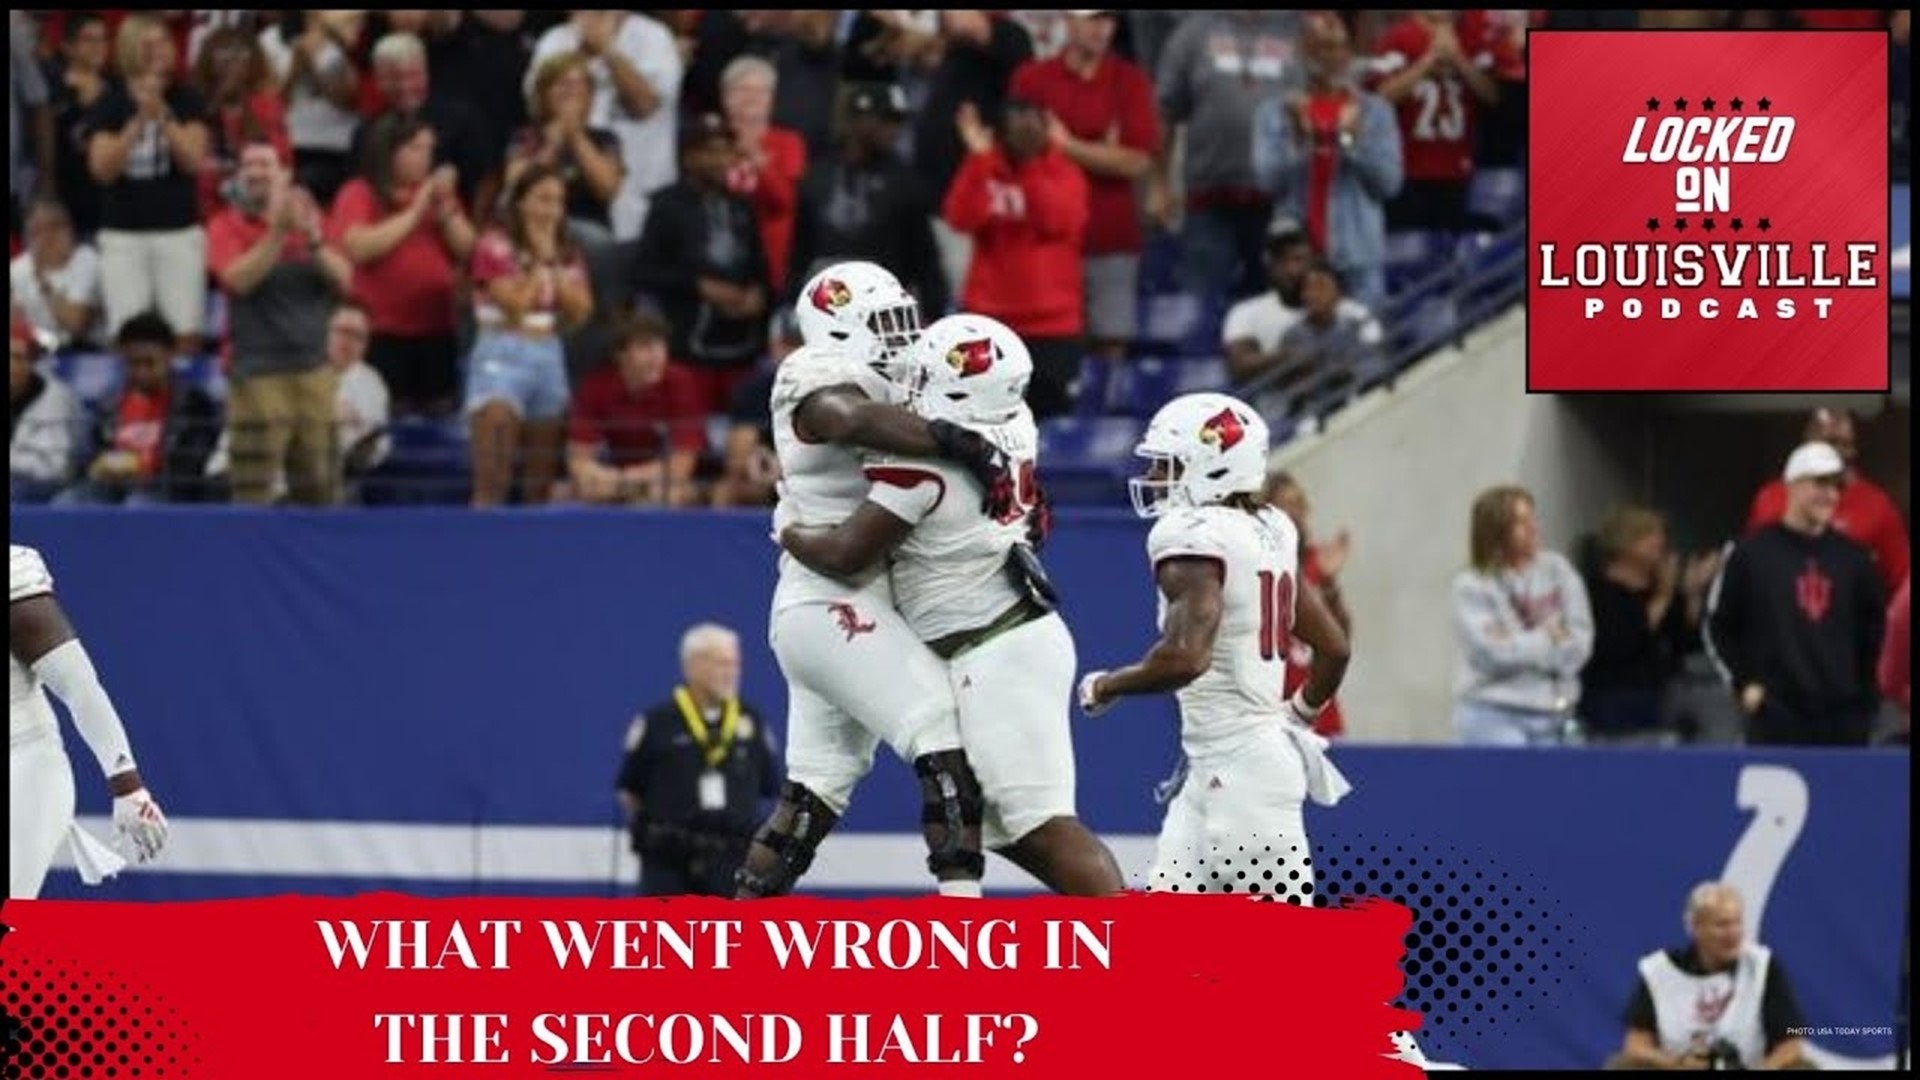 What went wrong for the Louisville Cardinals in the second half against the Indiana Hoosiers?